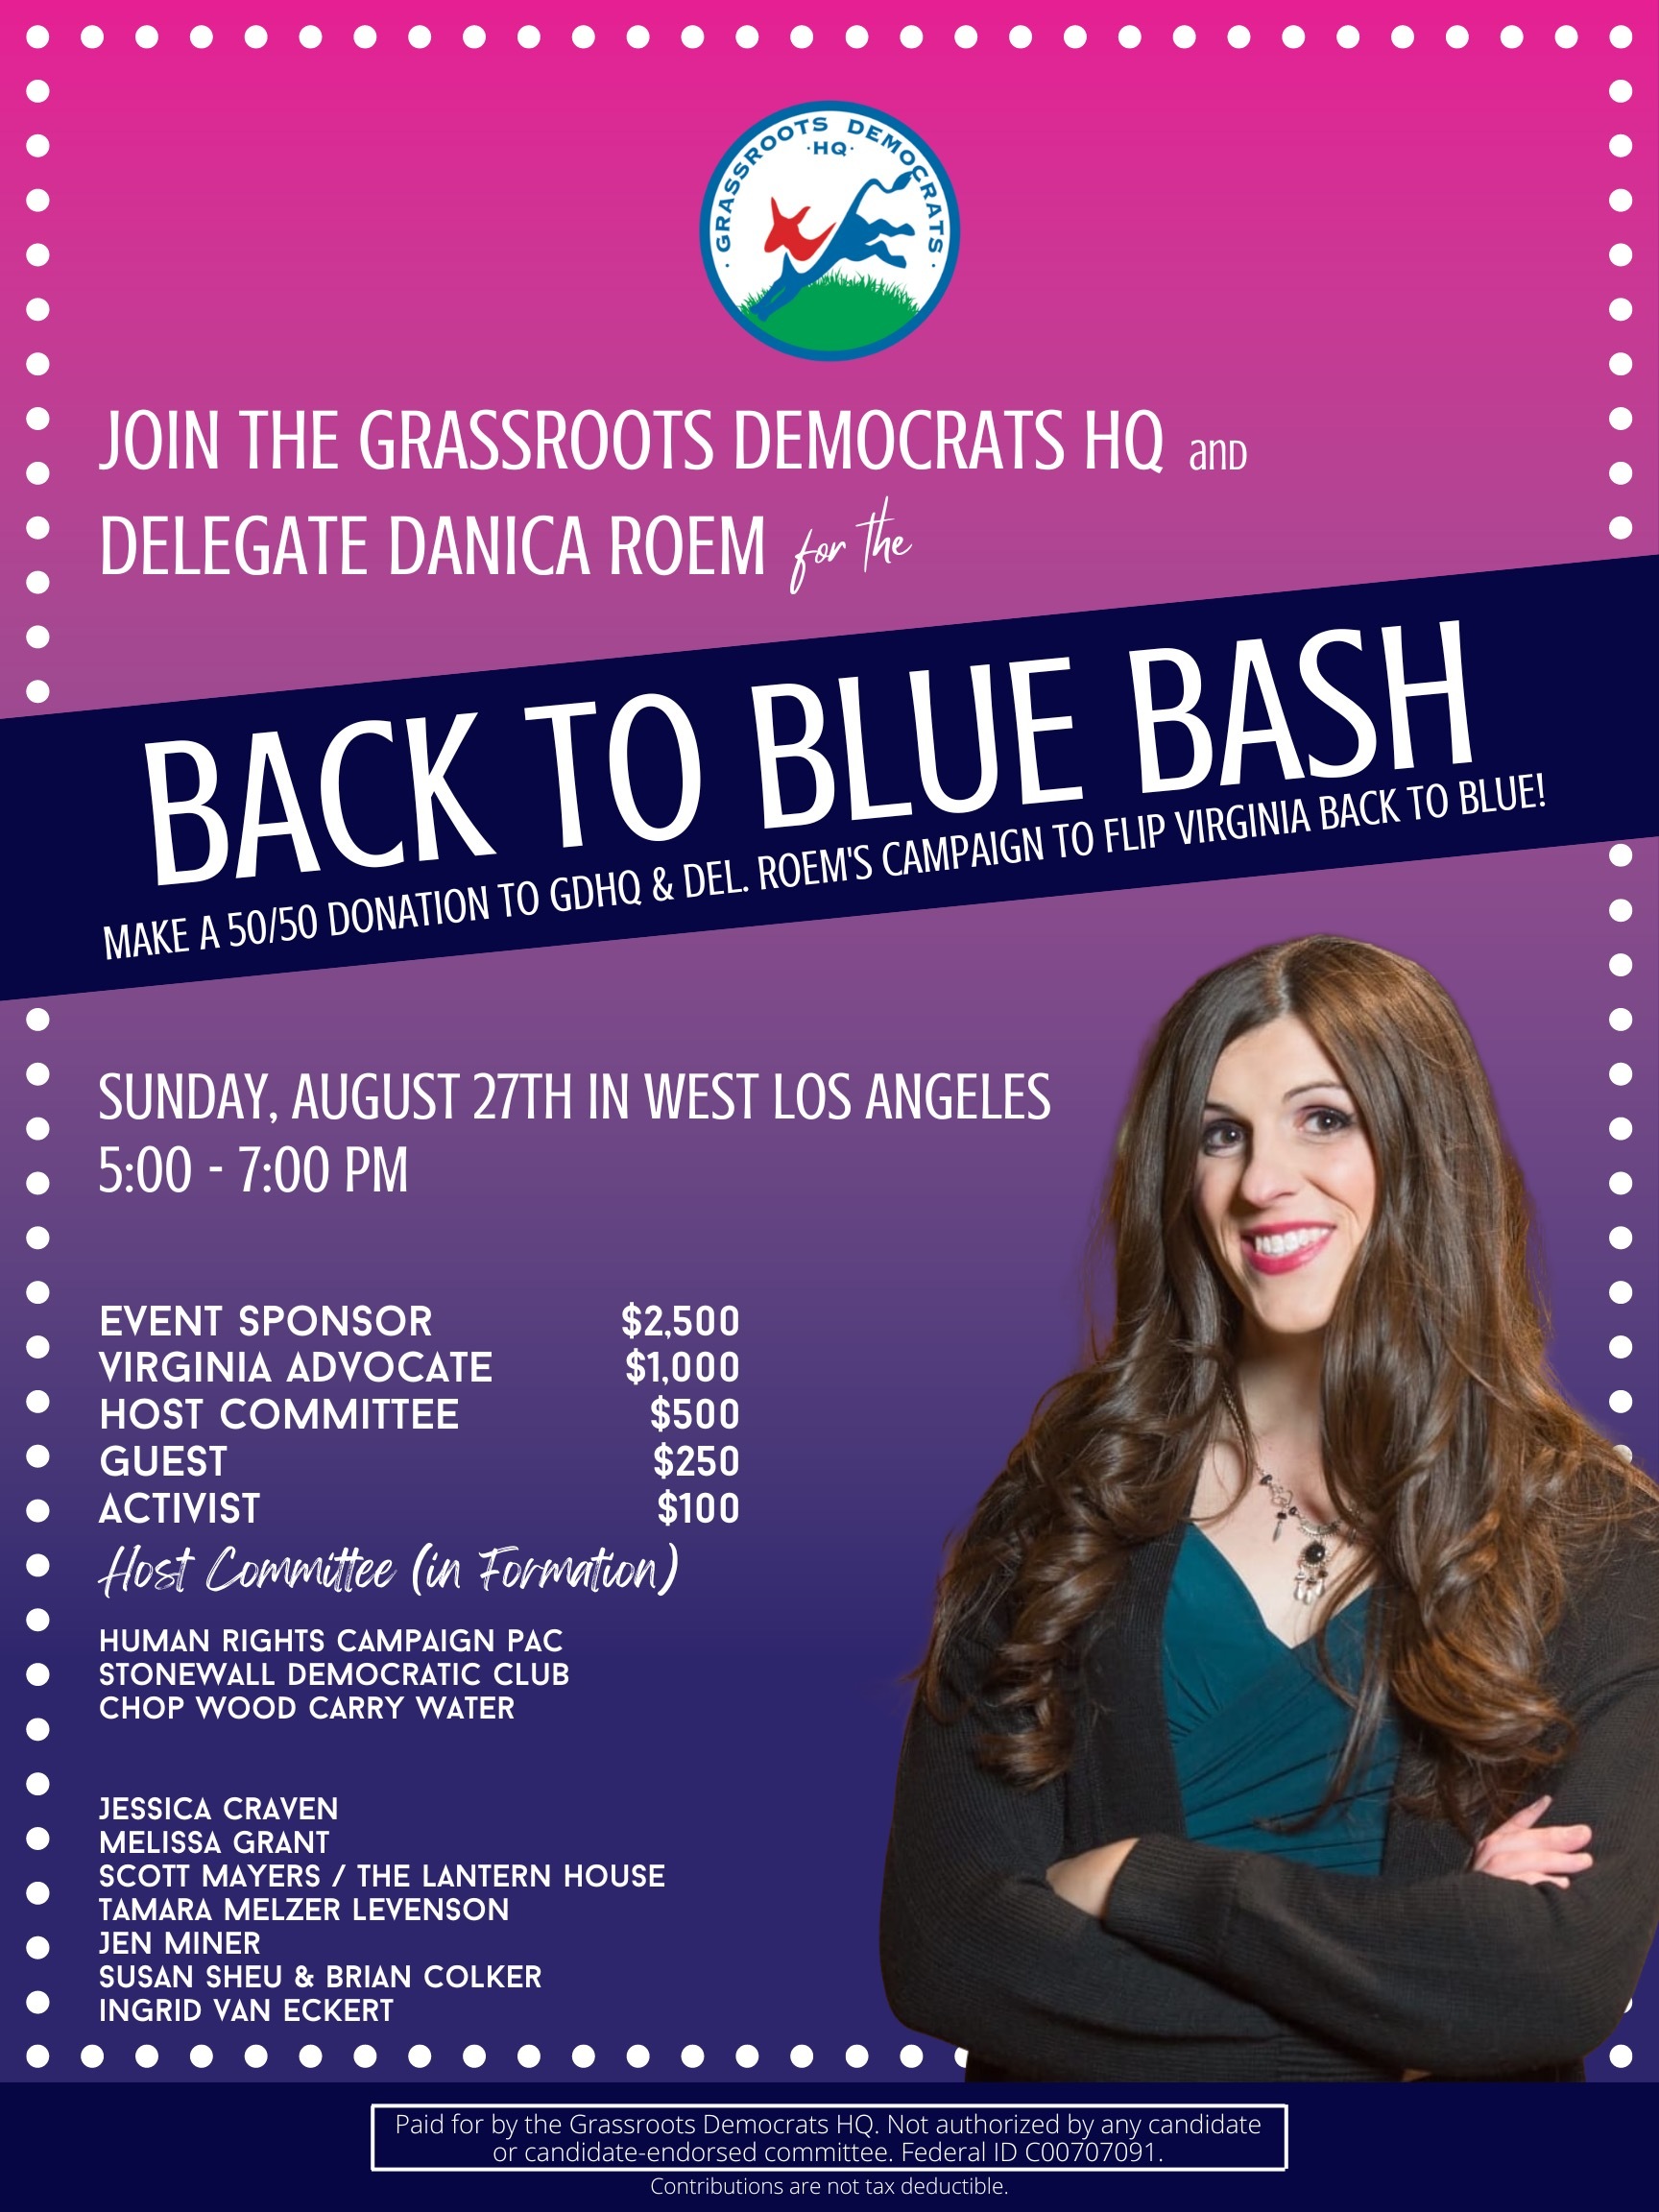 Back to Blue Bash with Danica Rohm